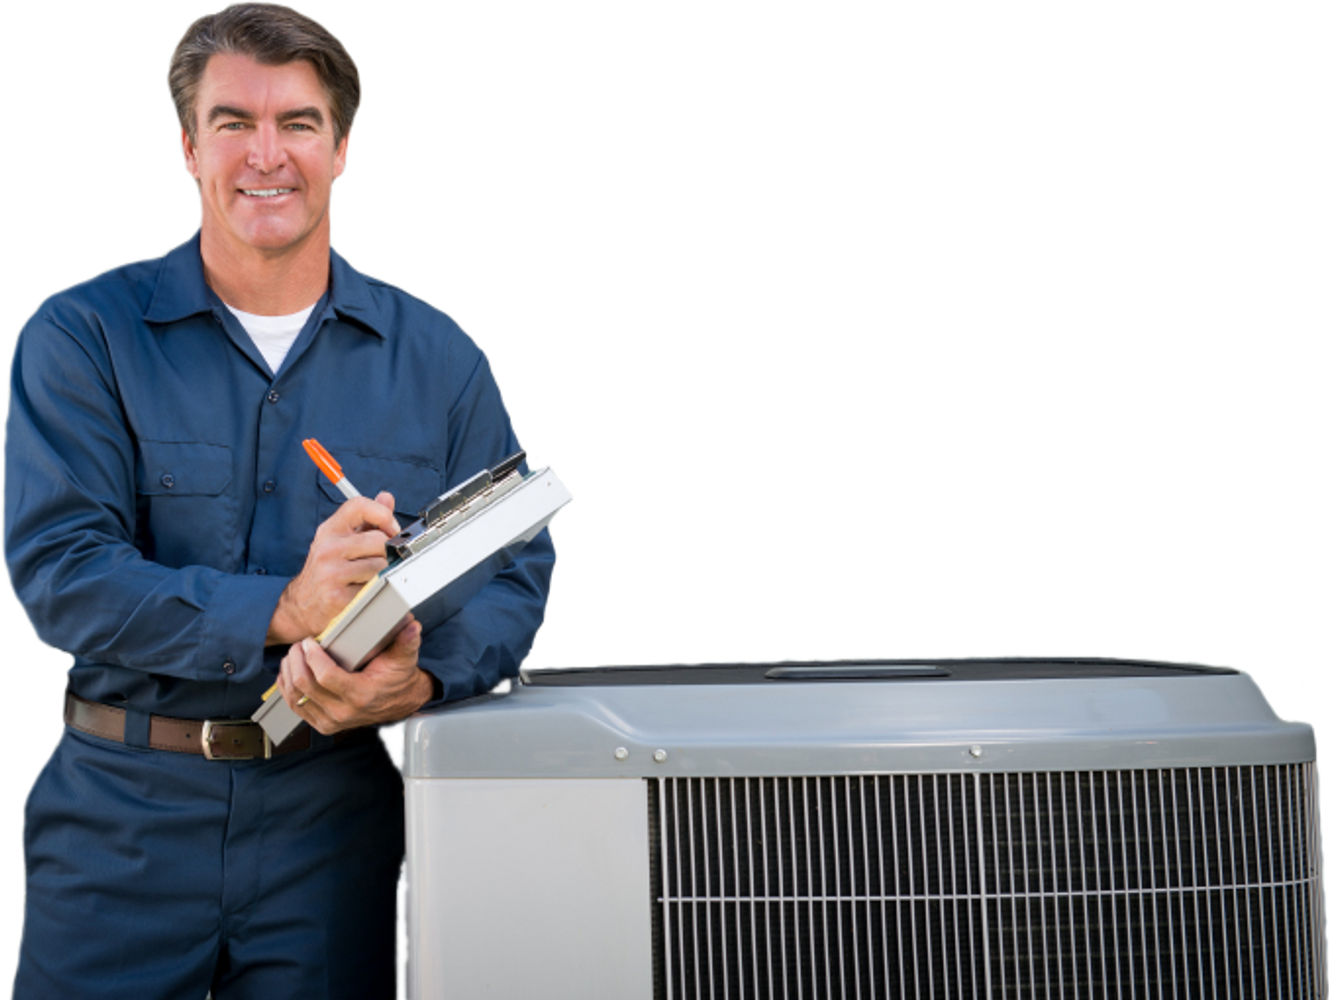 Eric Smock Heating & Air Conditioning, Inc.